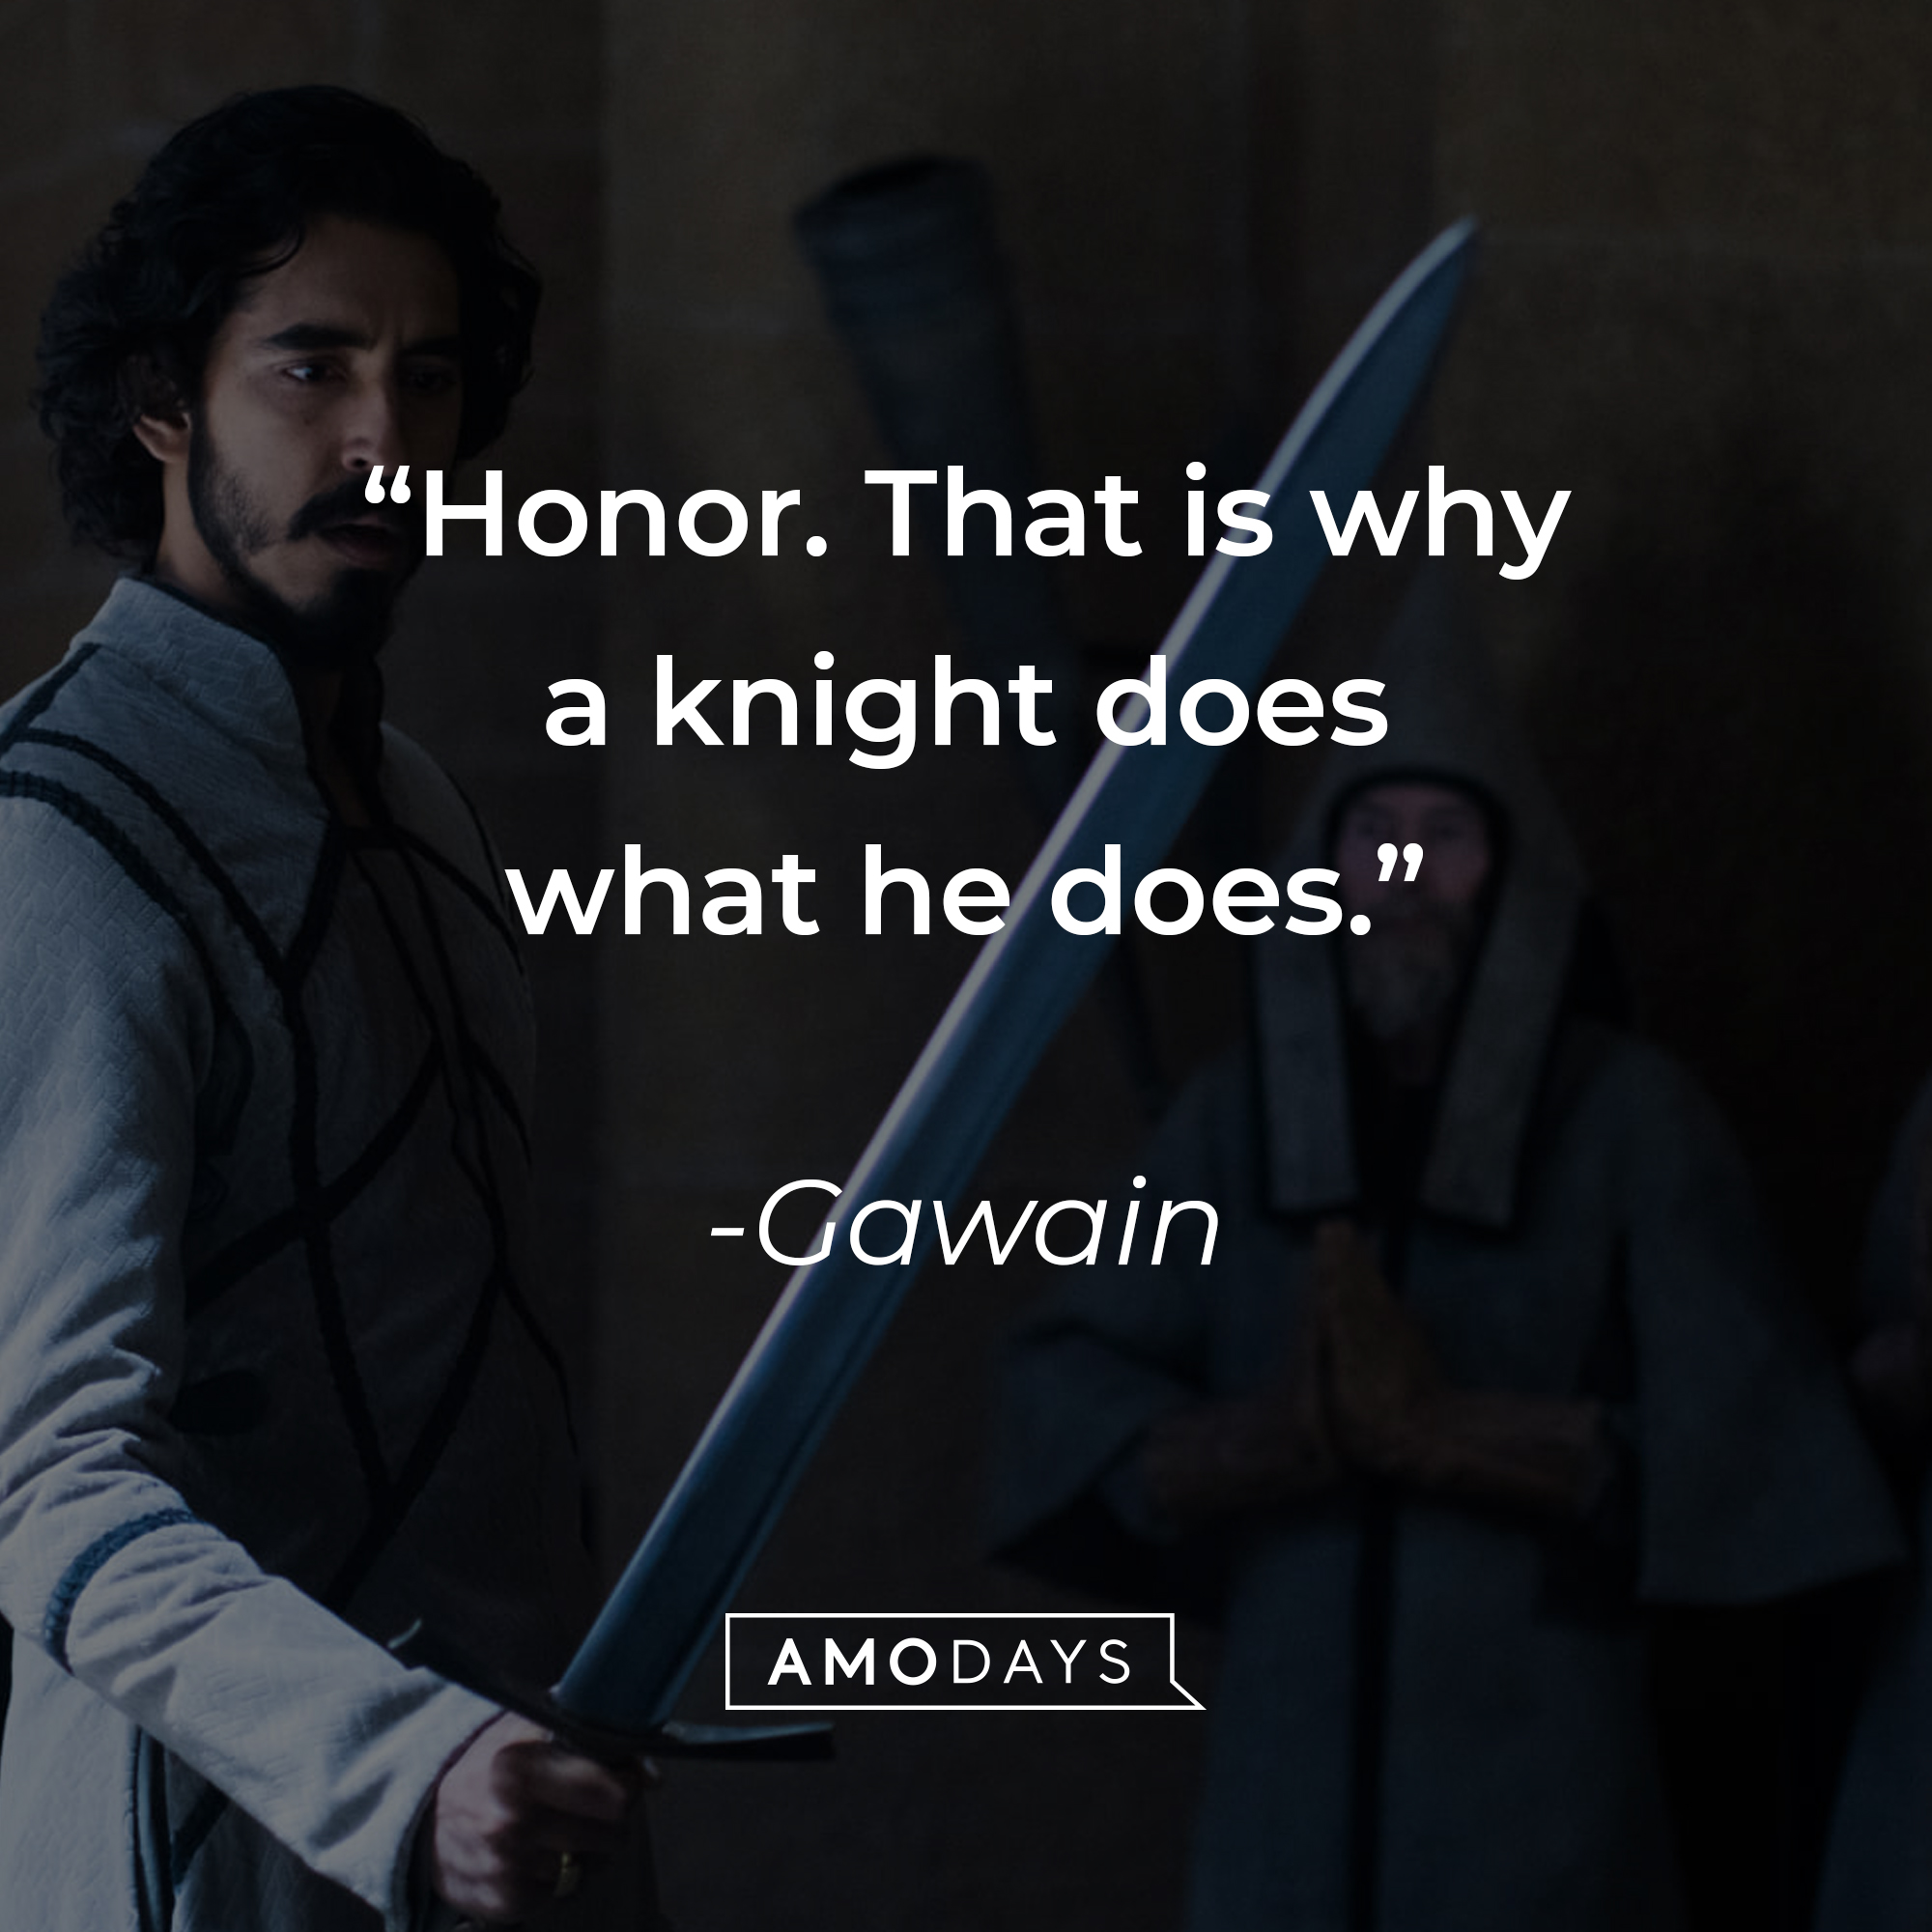 Gawain's quote: "Honor. That is why a knight does what he does." | Source: facebook.com/TheGreenKnight